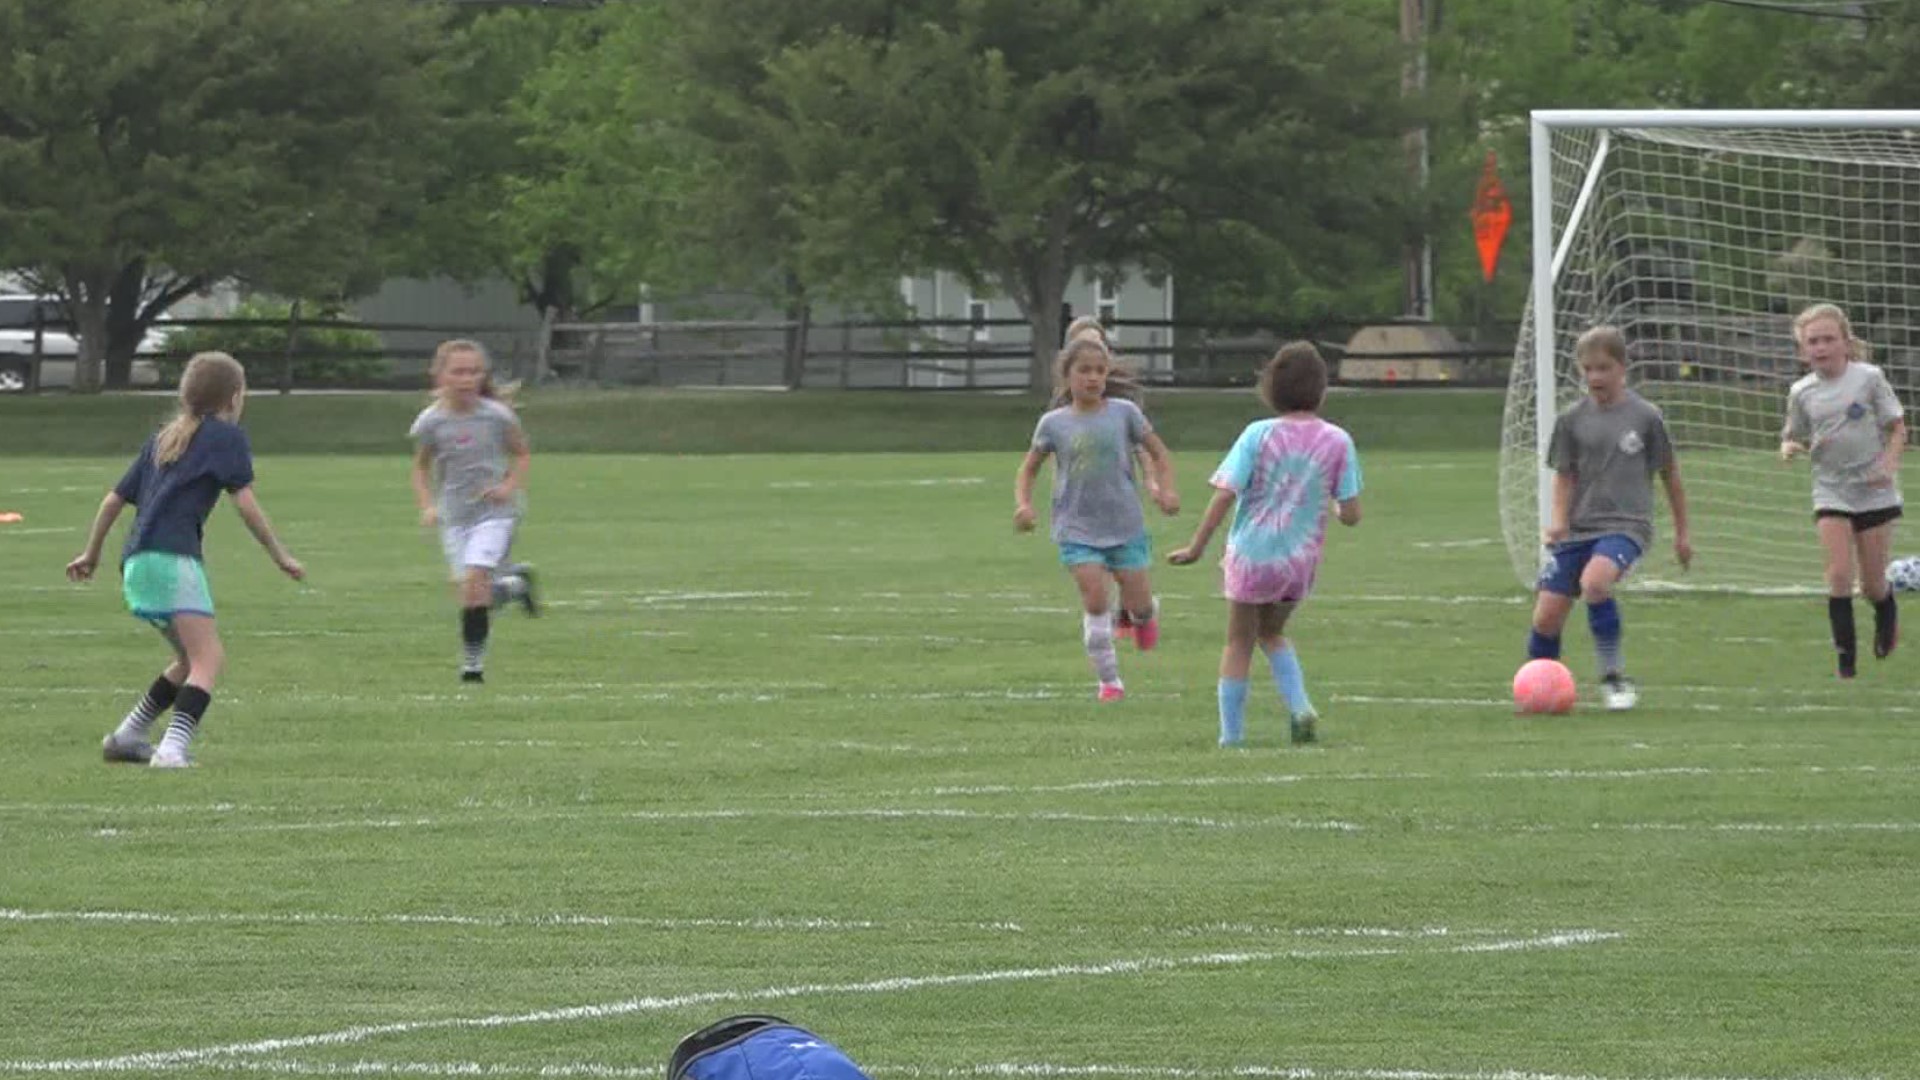 18th Annual Pacesetter Soccer Invitational returns to Sylvania